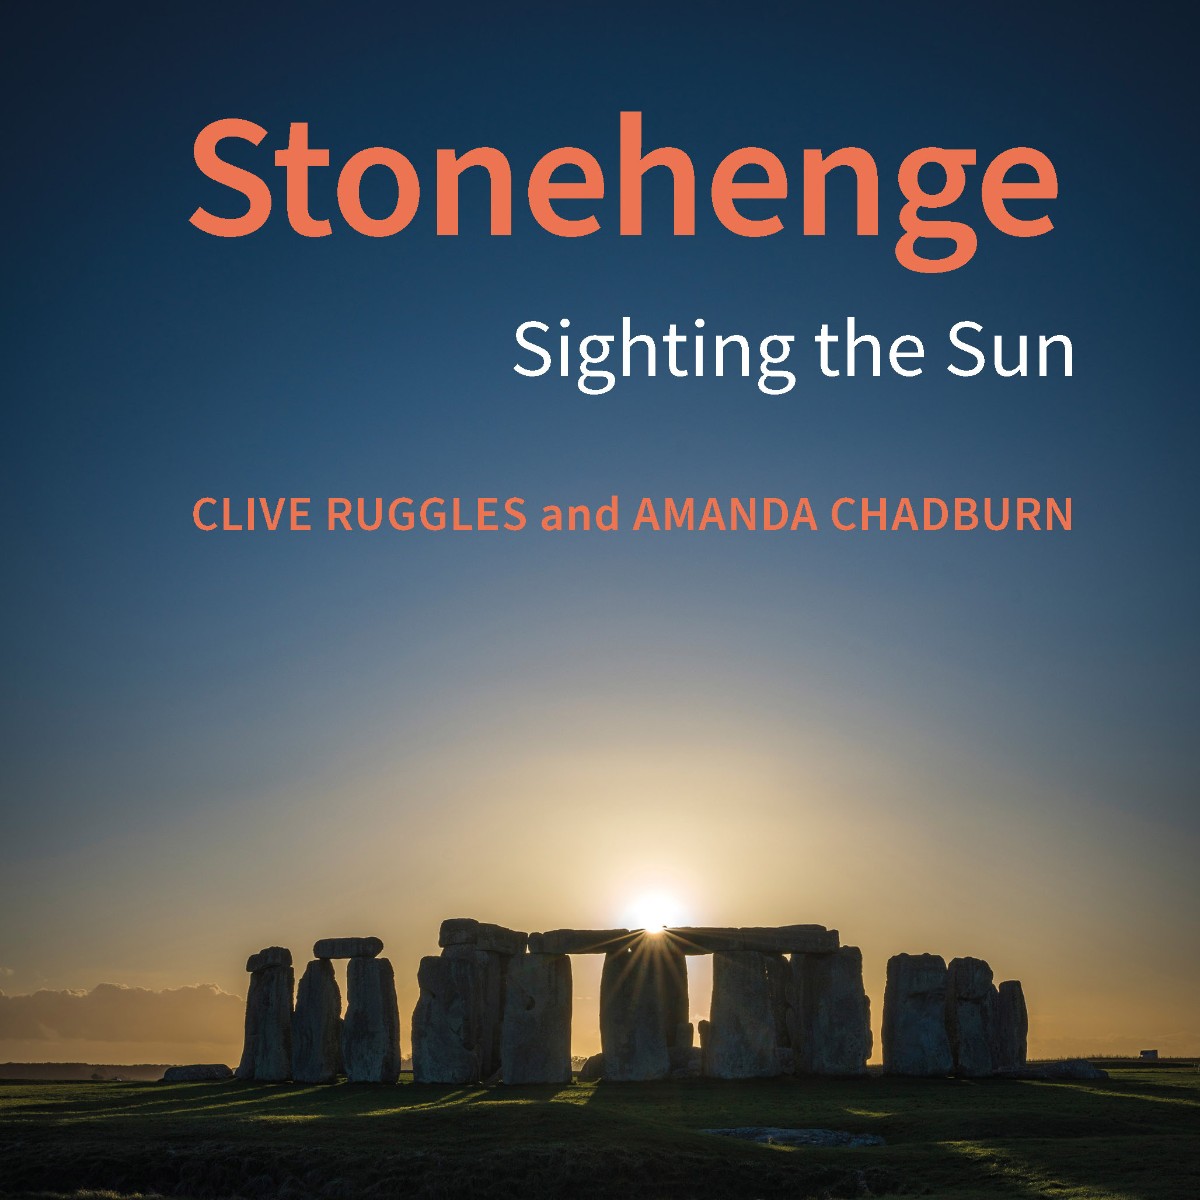 #Newbook on Stonehenge's connection to the skies, sun, and moon - perfect for experts and curious minds alike! 'Stonehenge: Sighting the Sun' by Clive Ruggles and Amanda Chadburn. Published by LUP for Historic England. Out 8 May 2024 | brnw.ch/21wJA26